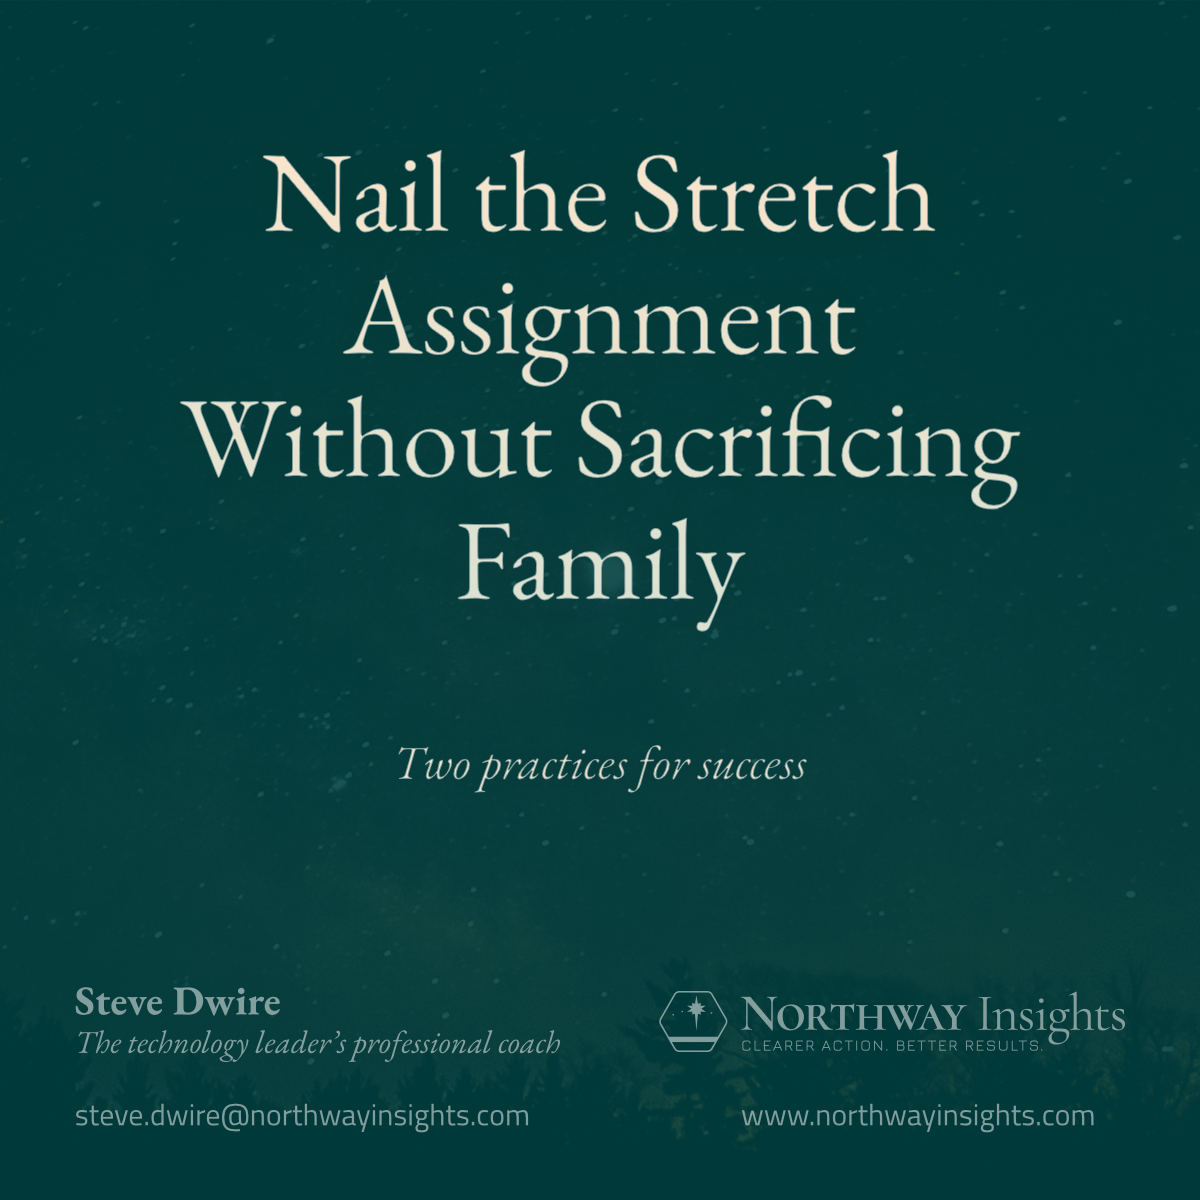 Nail the Stretch Assignment Without Sacrificing Family